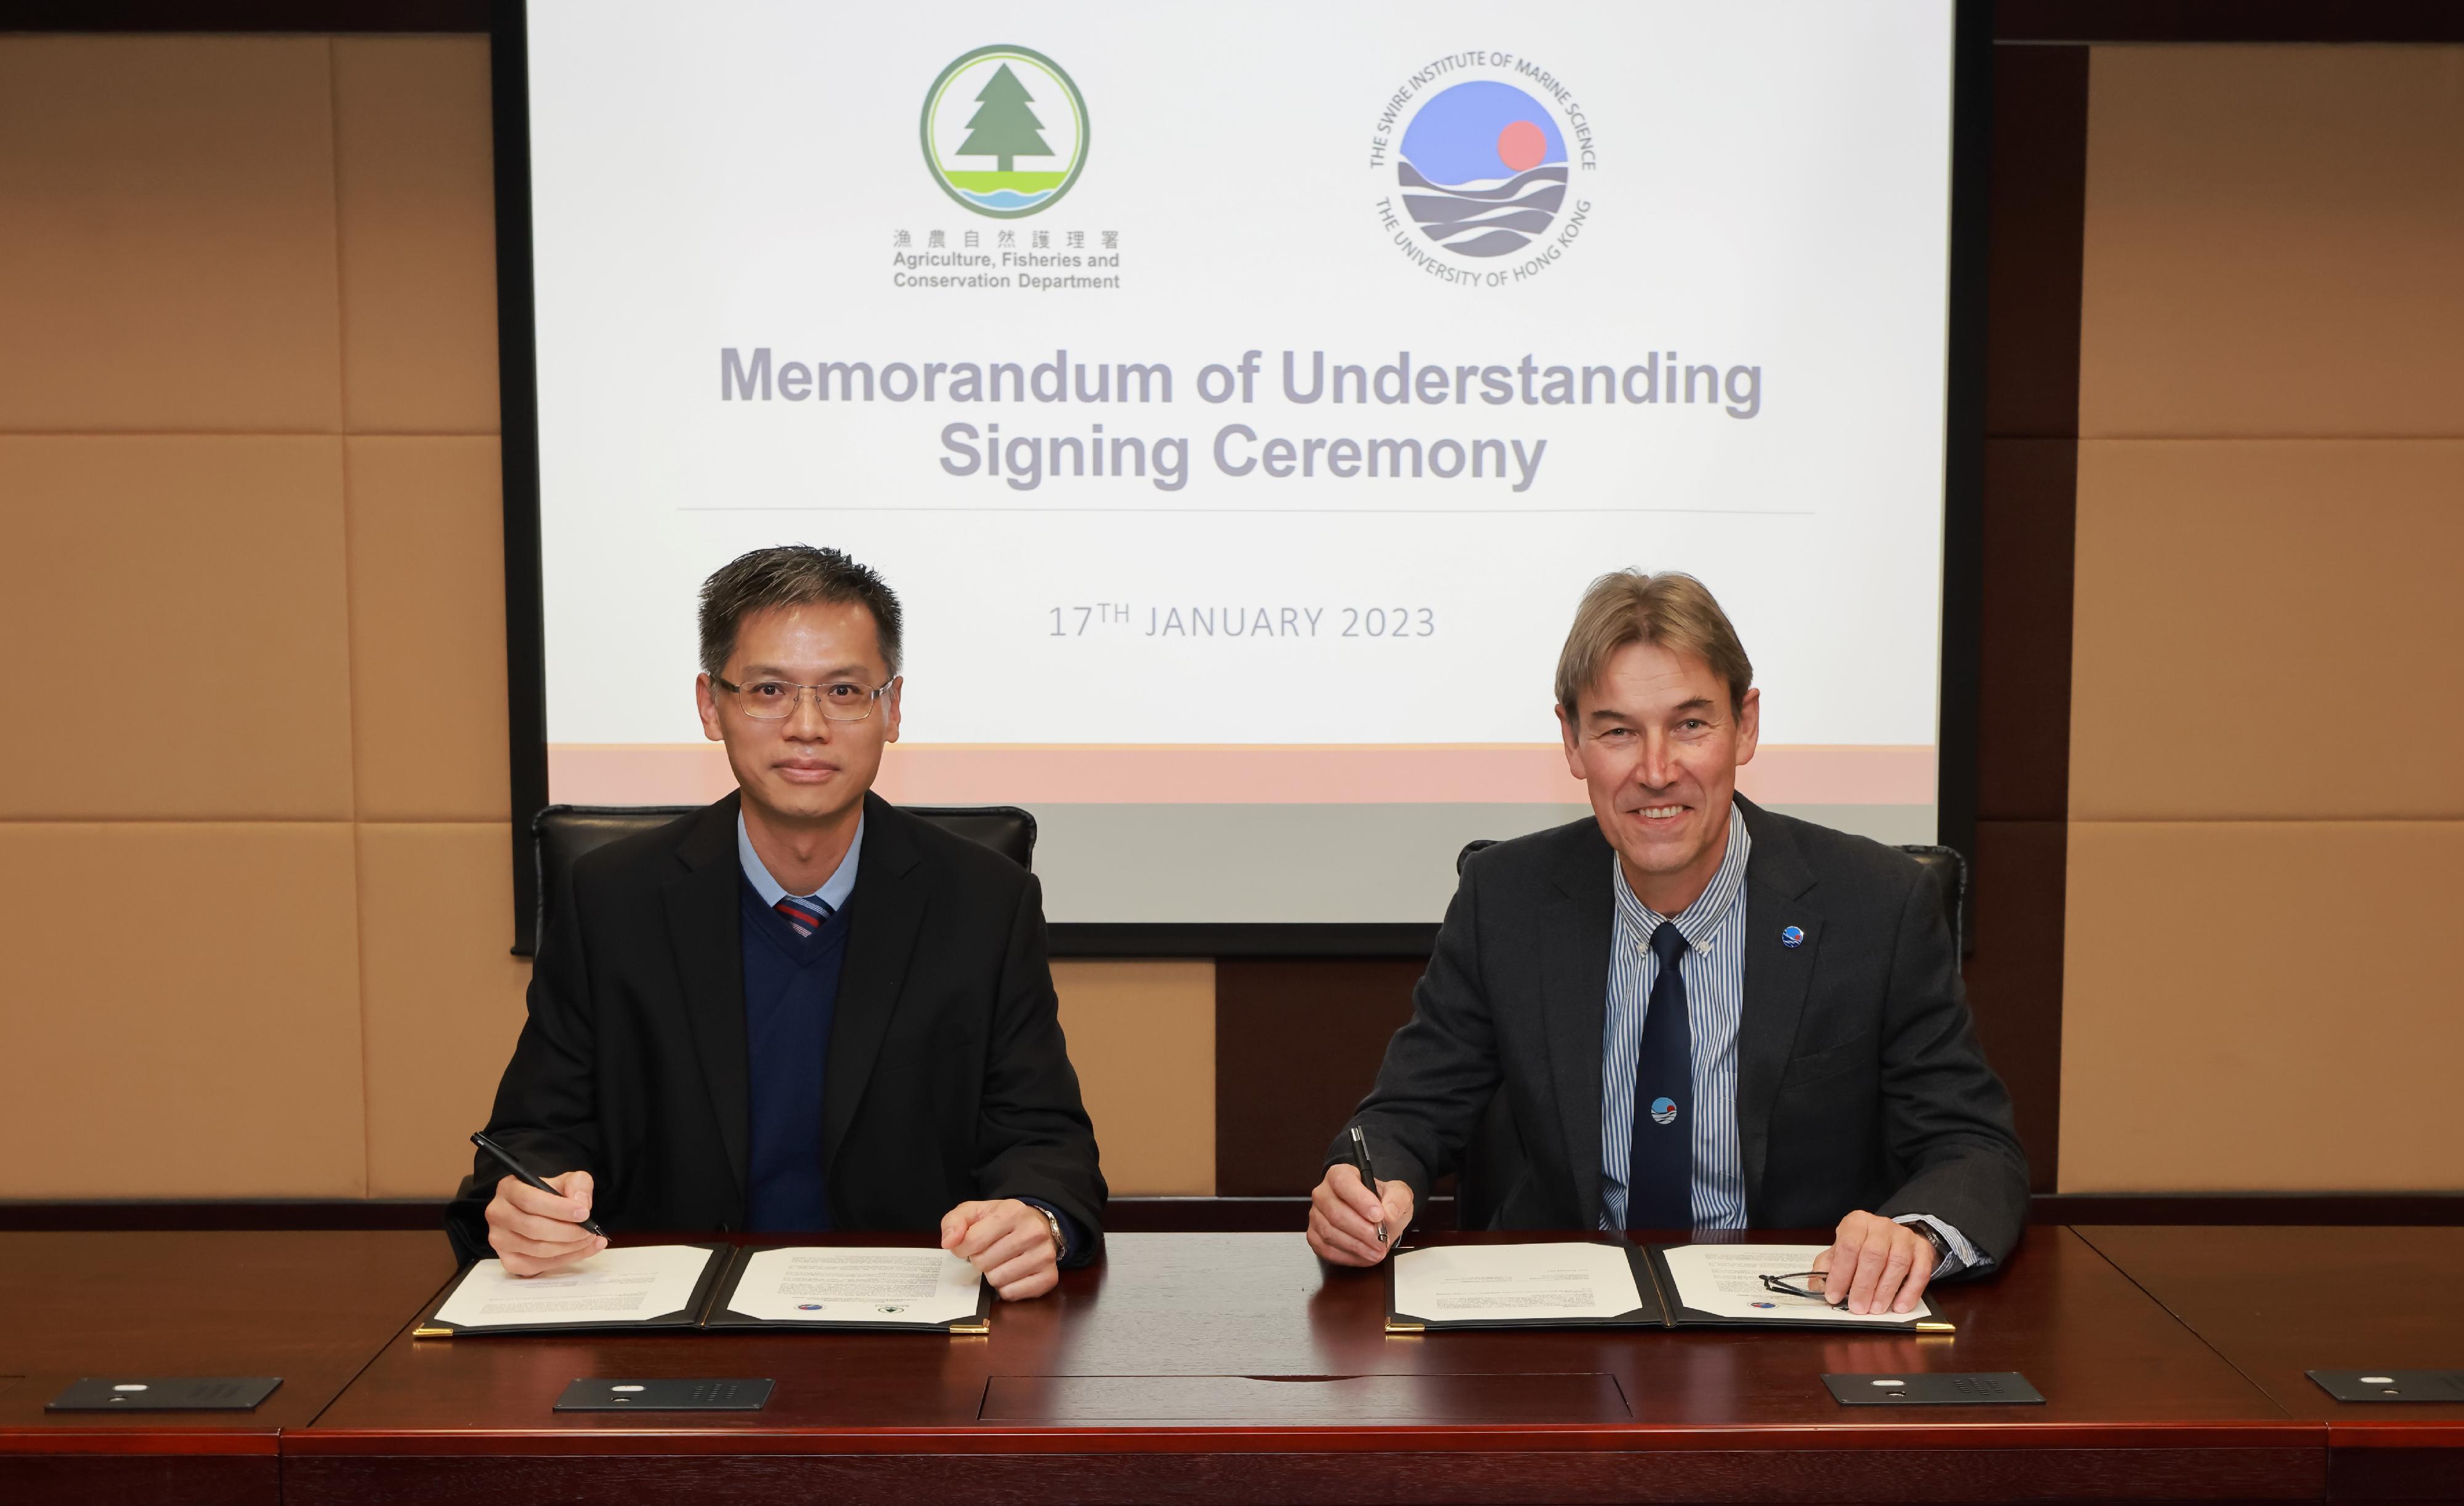 The Agriculture, Fisheries and Conservation Department (AFCD) and the Swire Institute of Marine Science (SWIMS) of the University of Hong Kong today (January 17) entered into a Memorandum of Understanding (MoU) for enhanced collaboration in managing and disseminating marine biodiversity data. Photo shows the Assistant Director (Conservation) of the AFCD, Mr Simon Chan (left), and the Director of SWIMS, Professor  Gray Williams (right), signing the MoU.